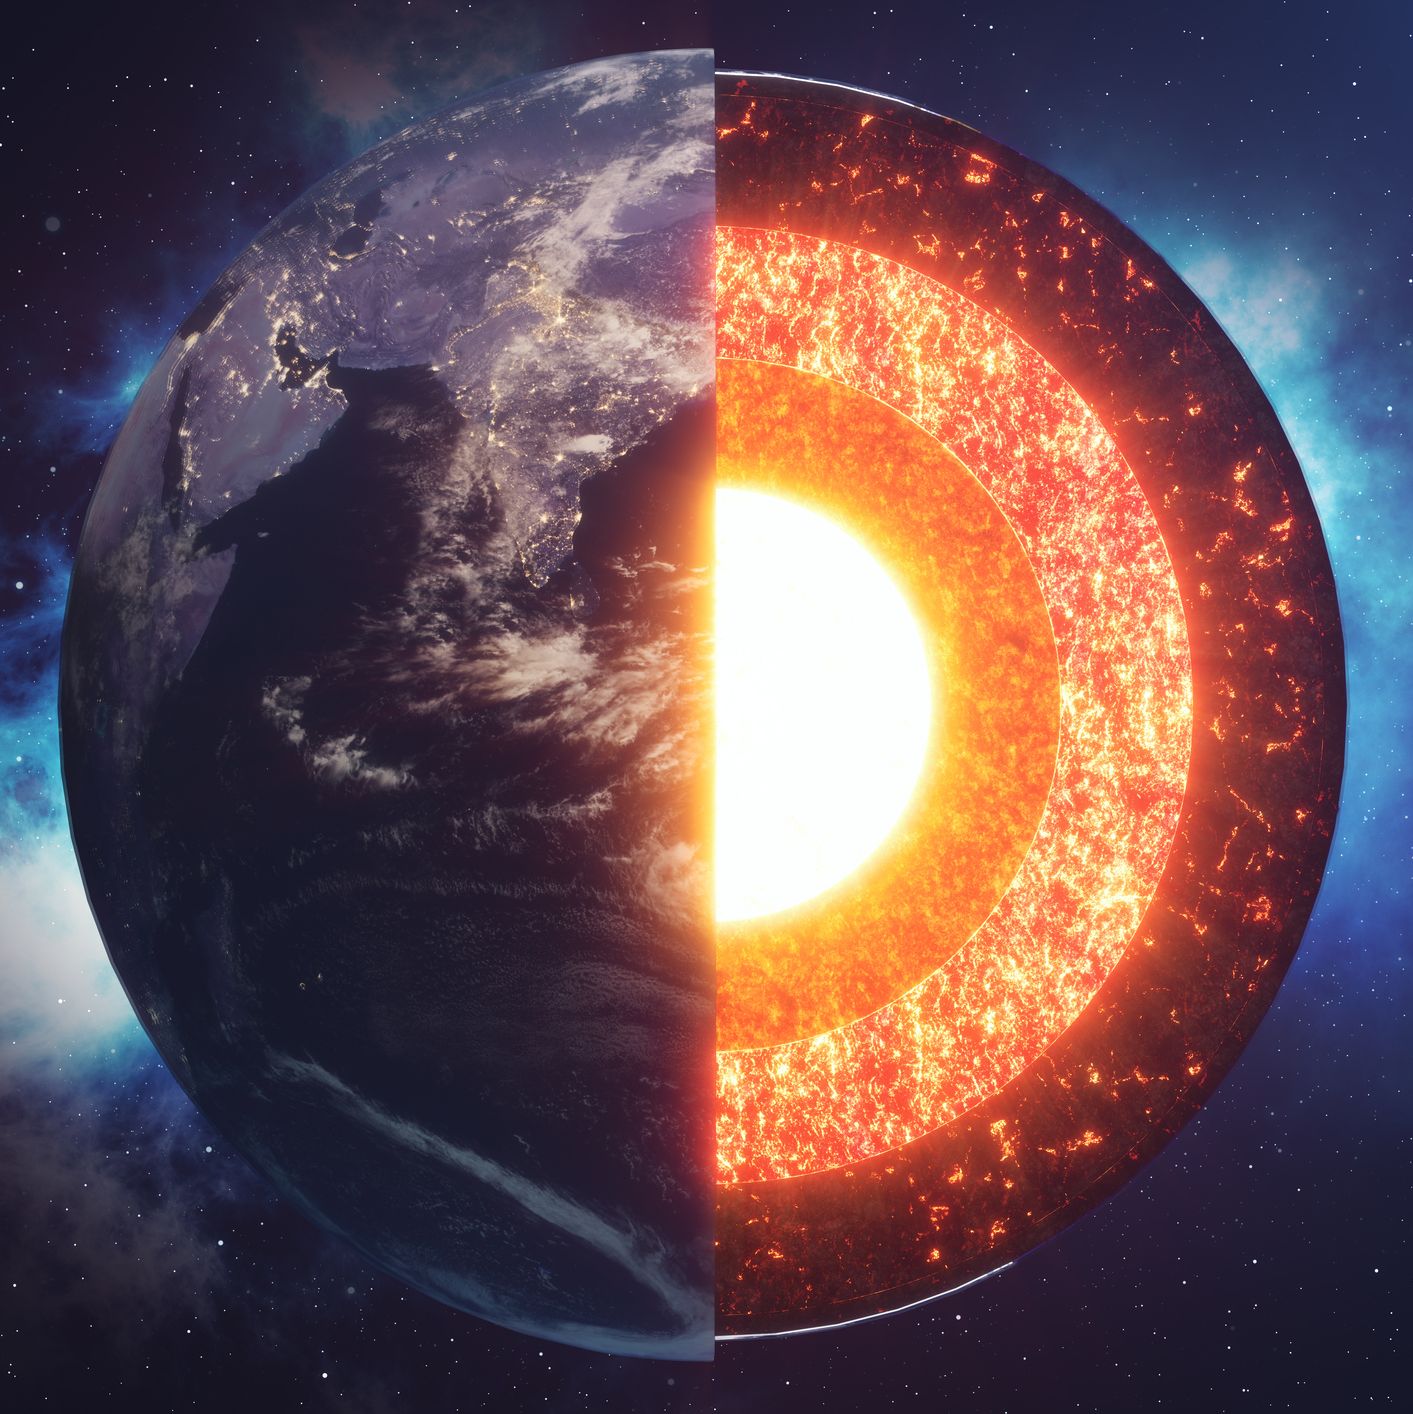 Actually, Earth's Solid Core Isn't All That Solid